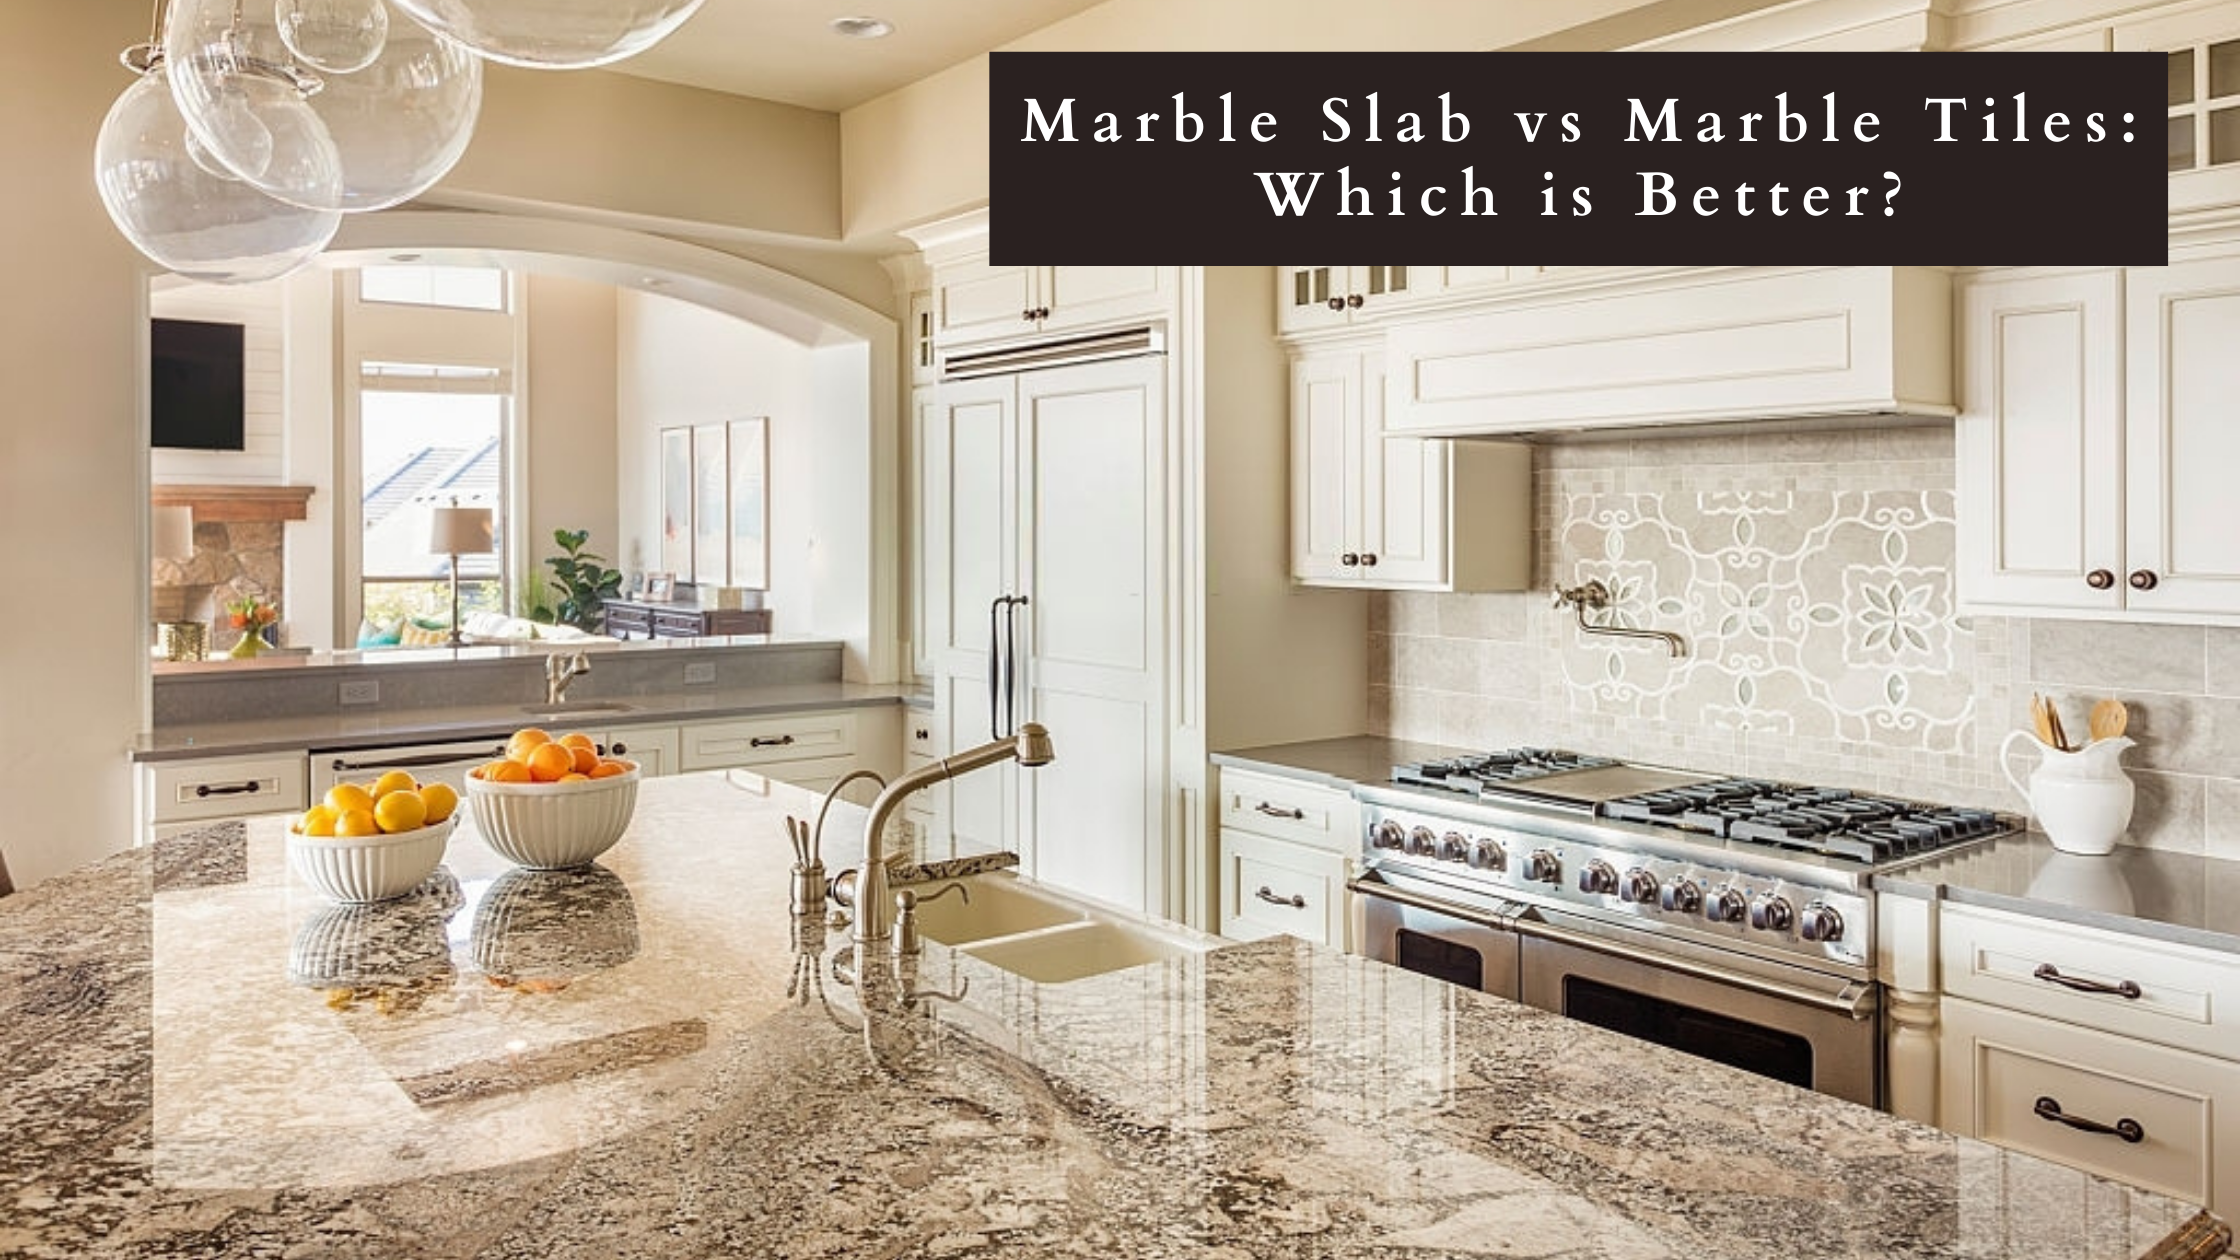 Marble Slab vs Marble Tiles: Which is Better?